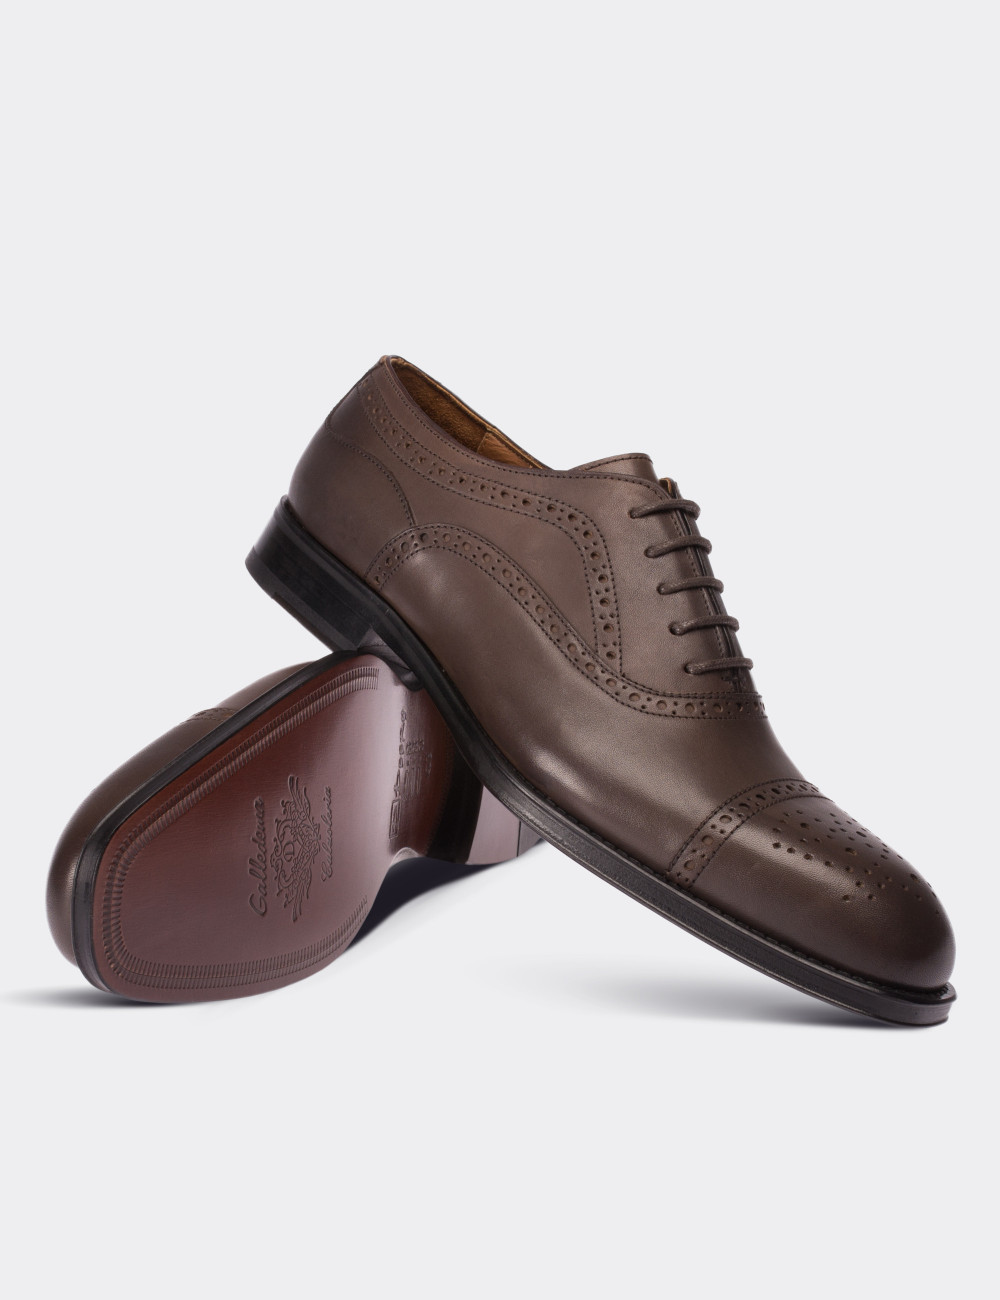 Sandstone  Leather Classic Shoes - 01595MVZNK01